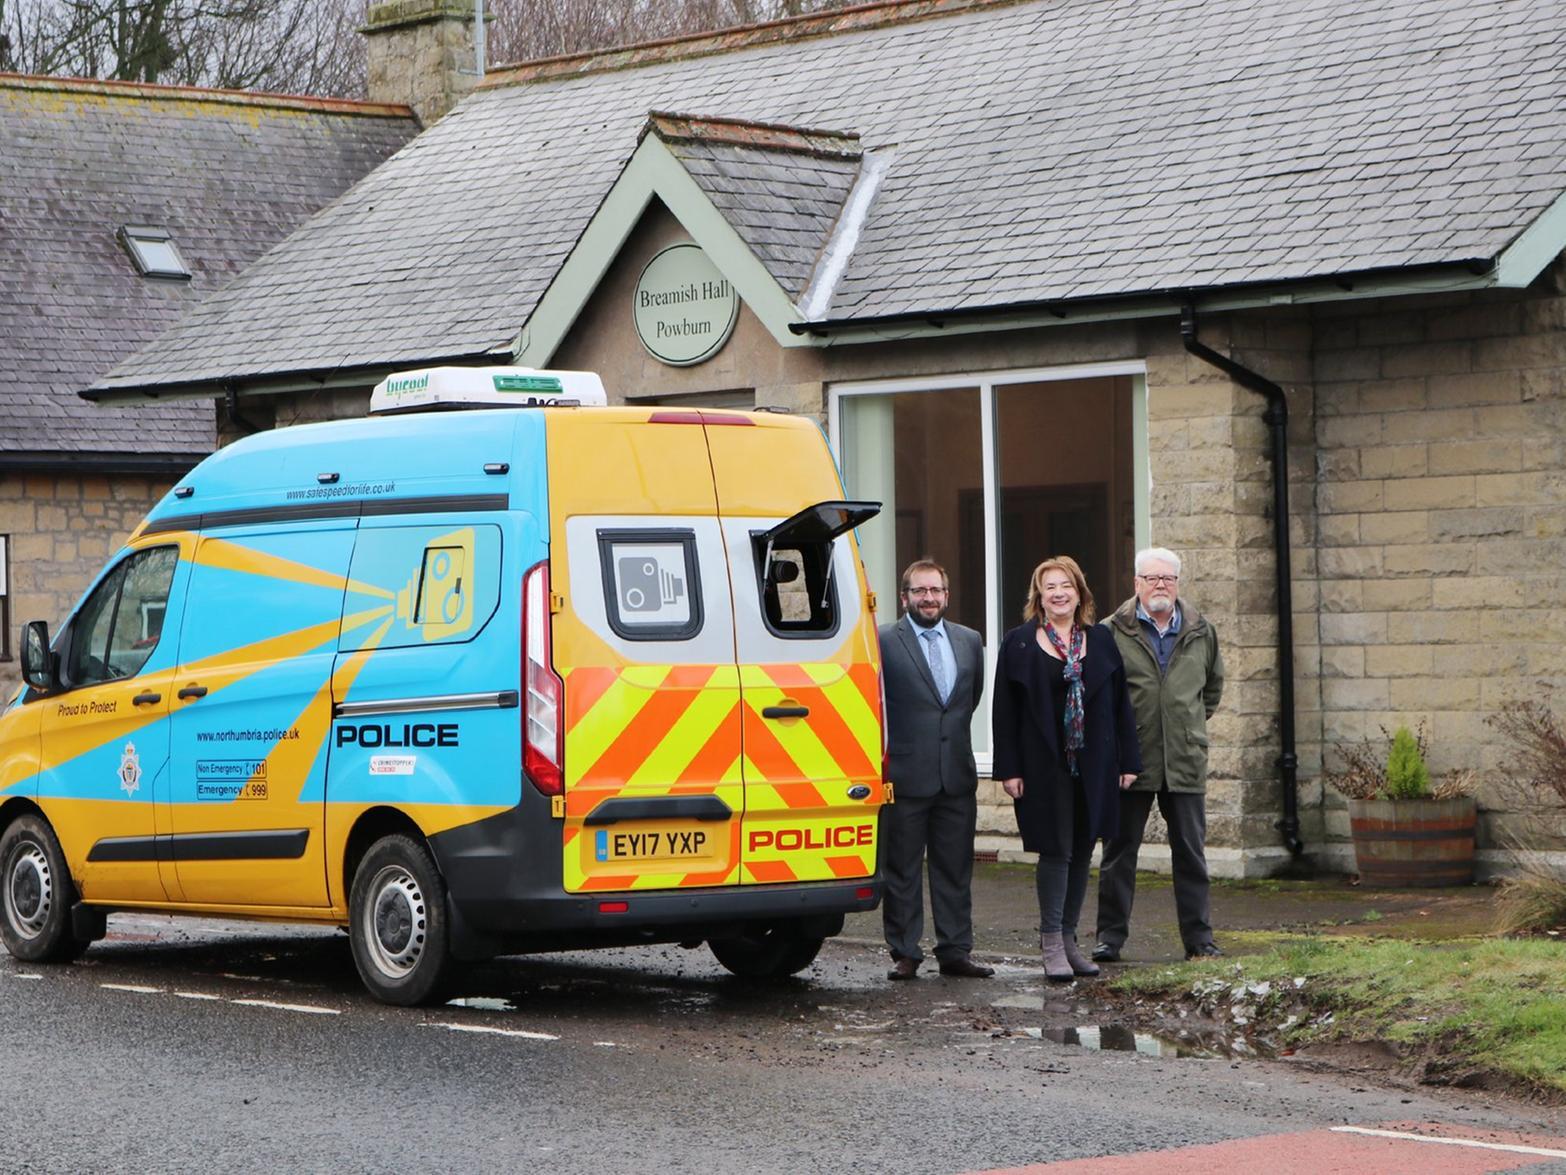 Mobile speed cameras are set up across Leeds and West Yorkshire this week